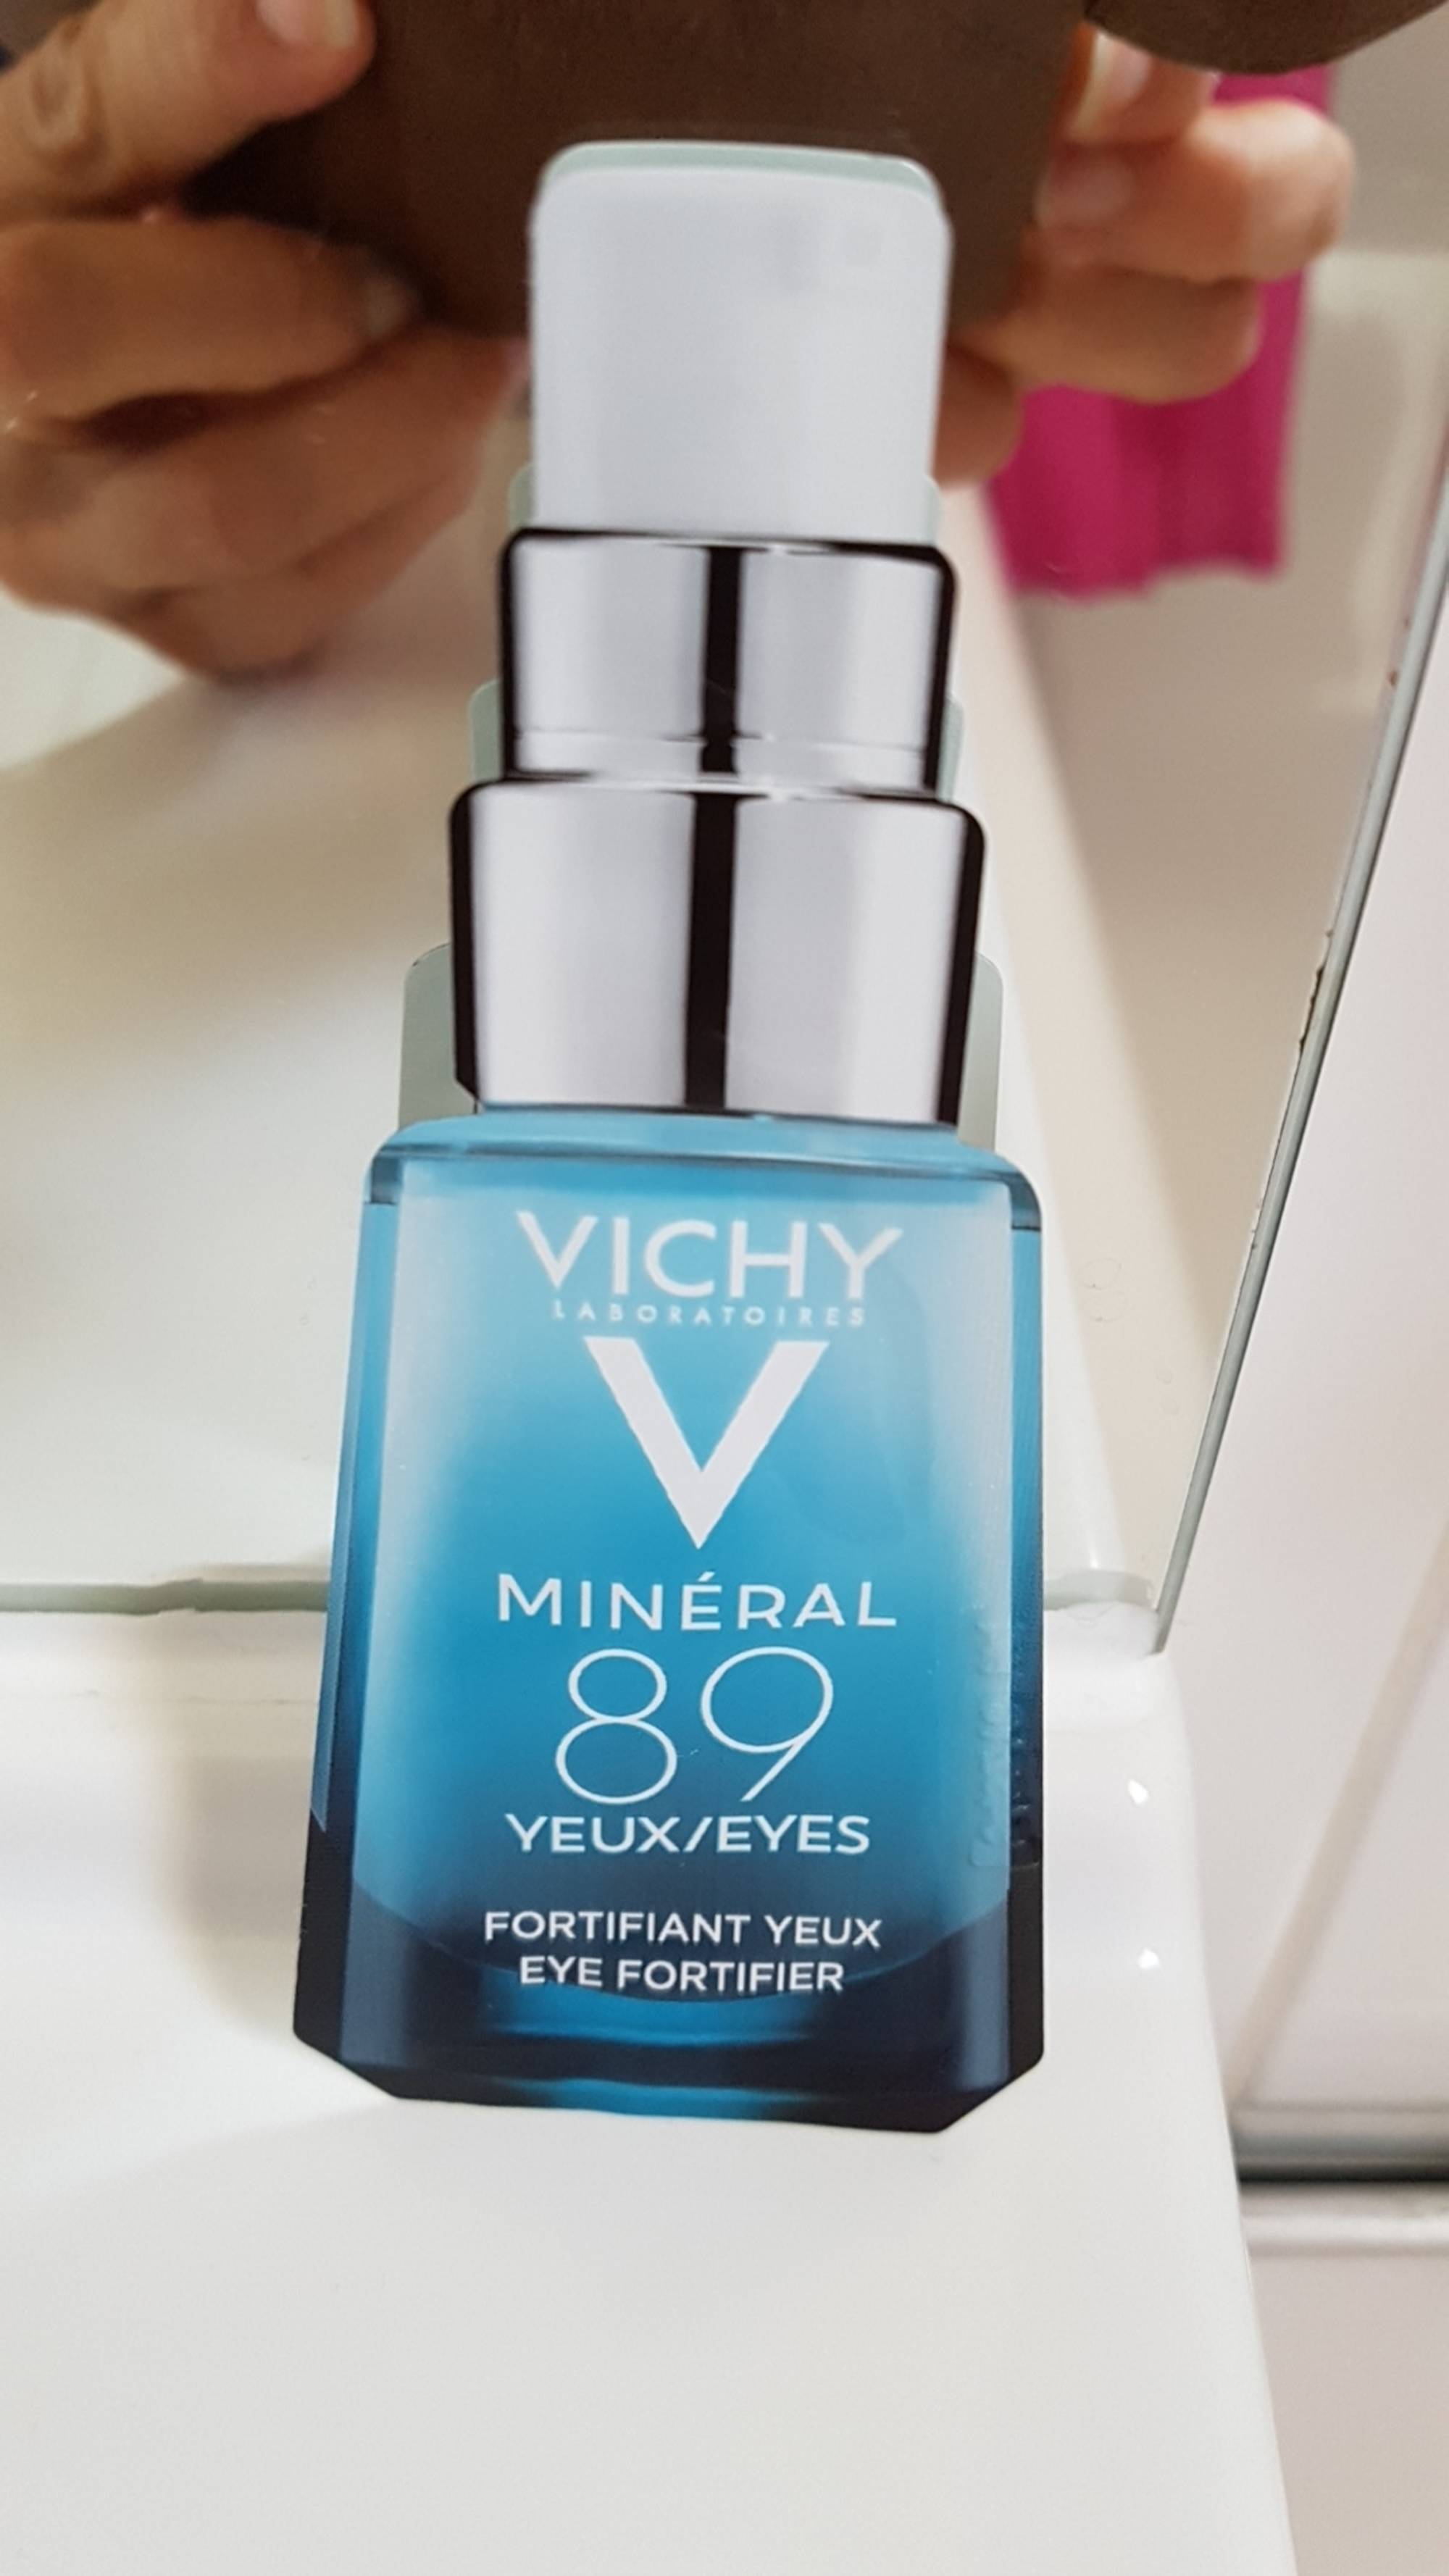 VICHY - Minéral 89 - Fortifiant yeux